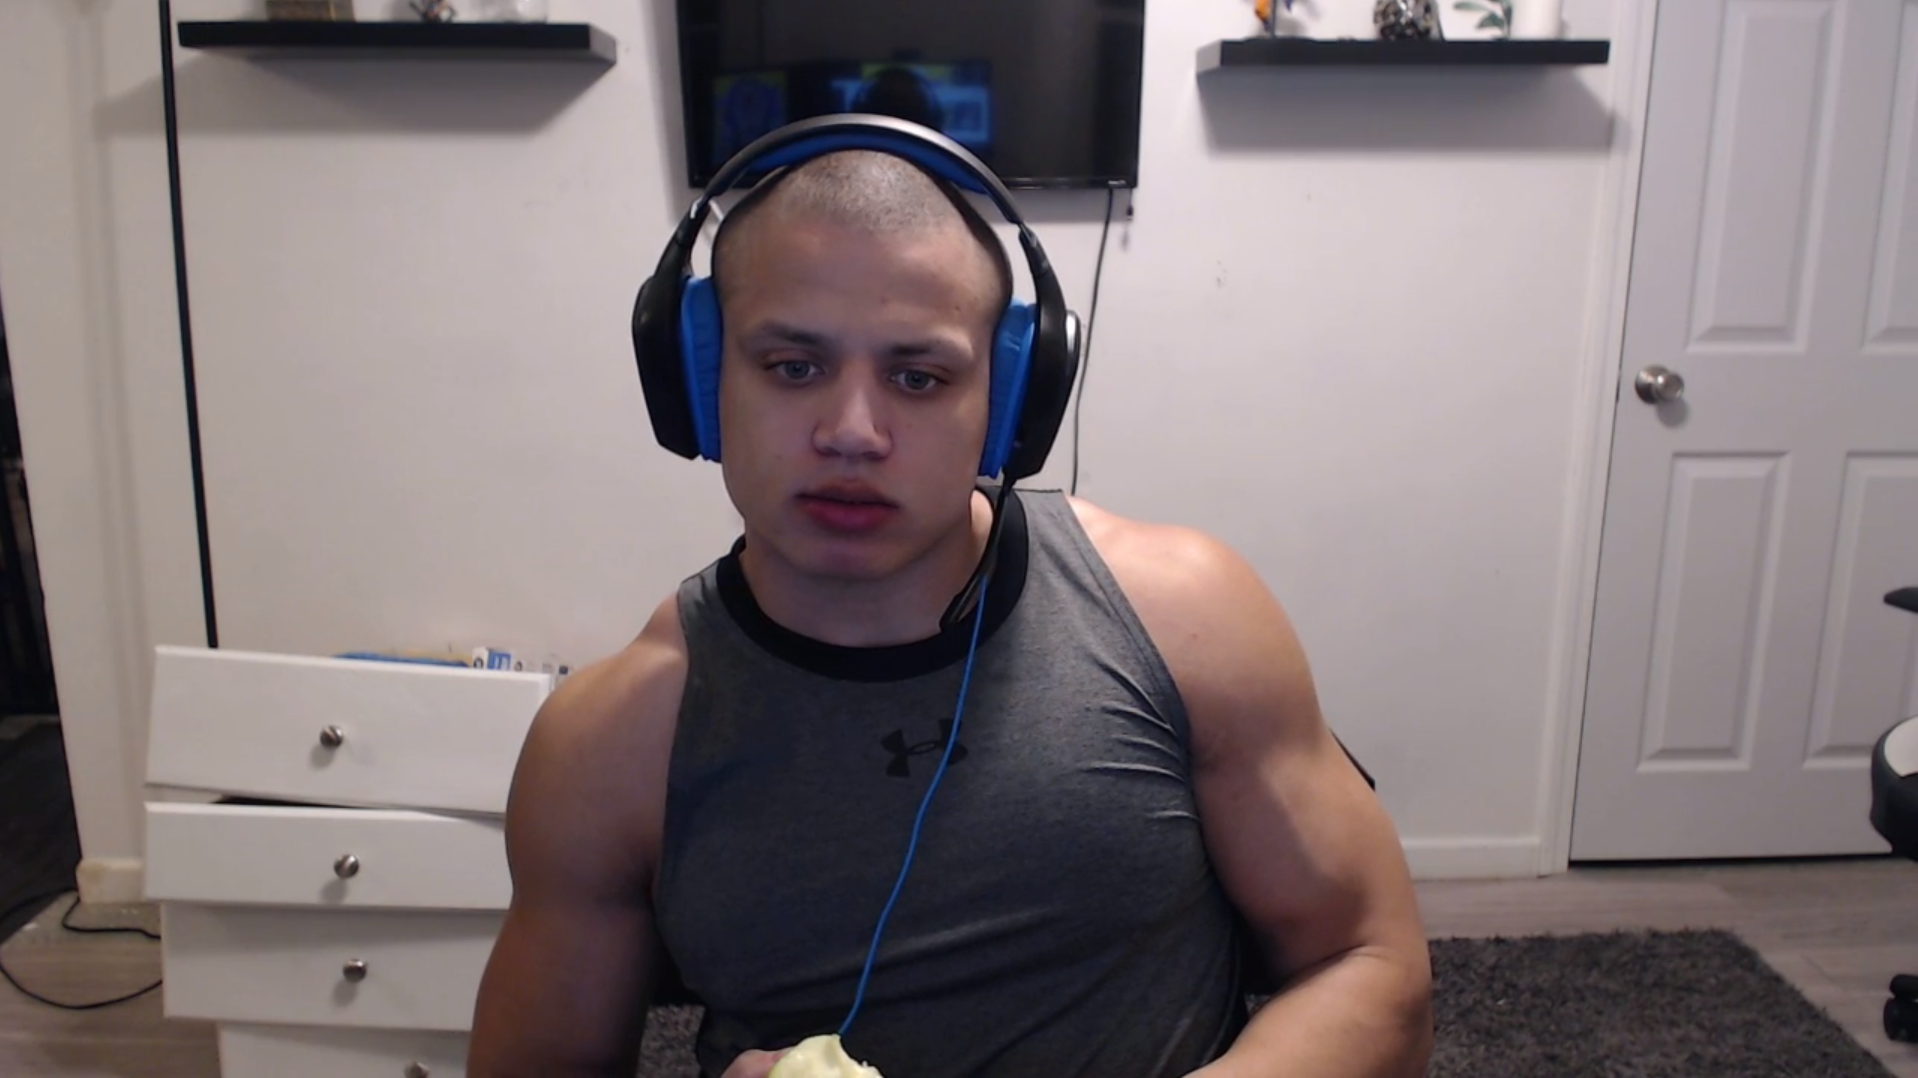 Tyler1 officially starts streaming League again today, and you don't